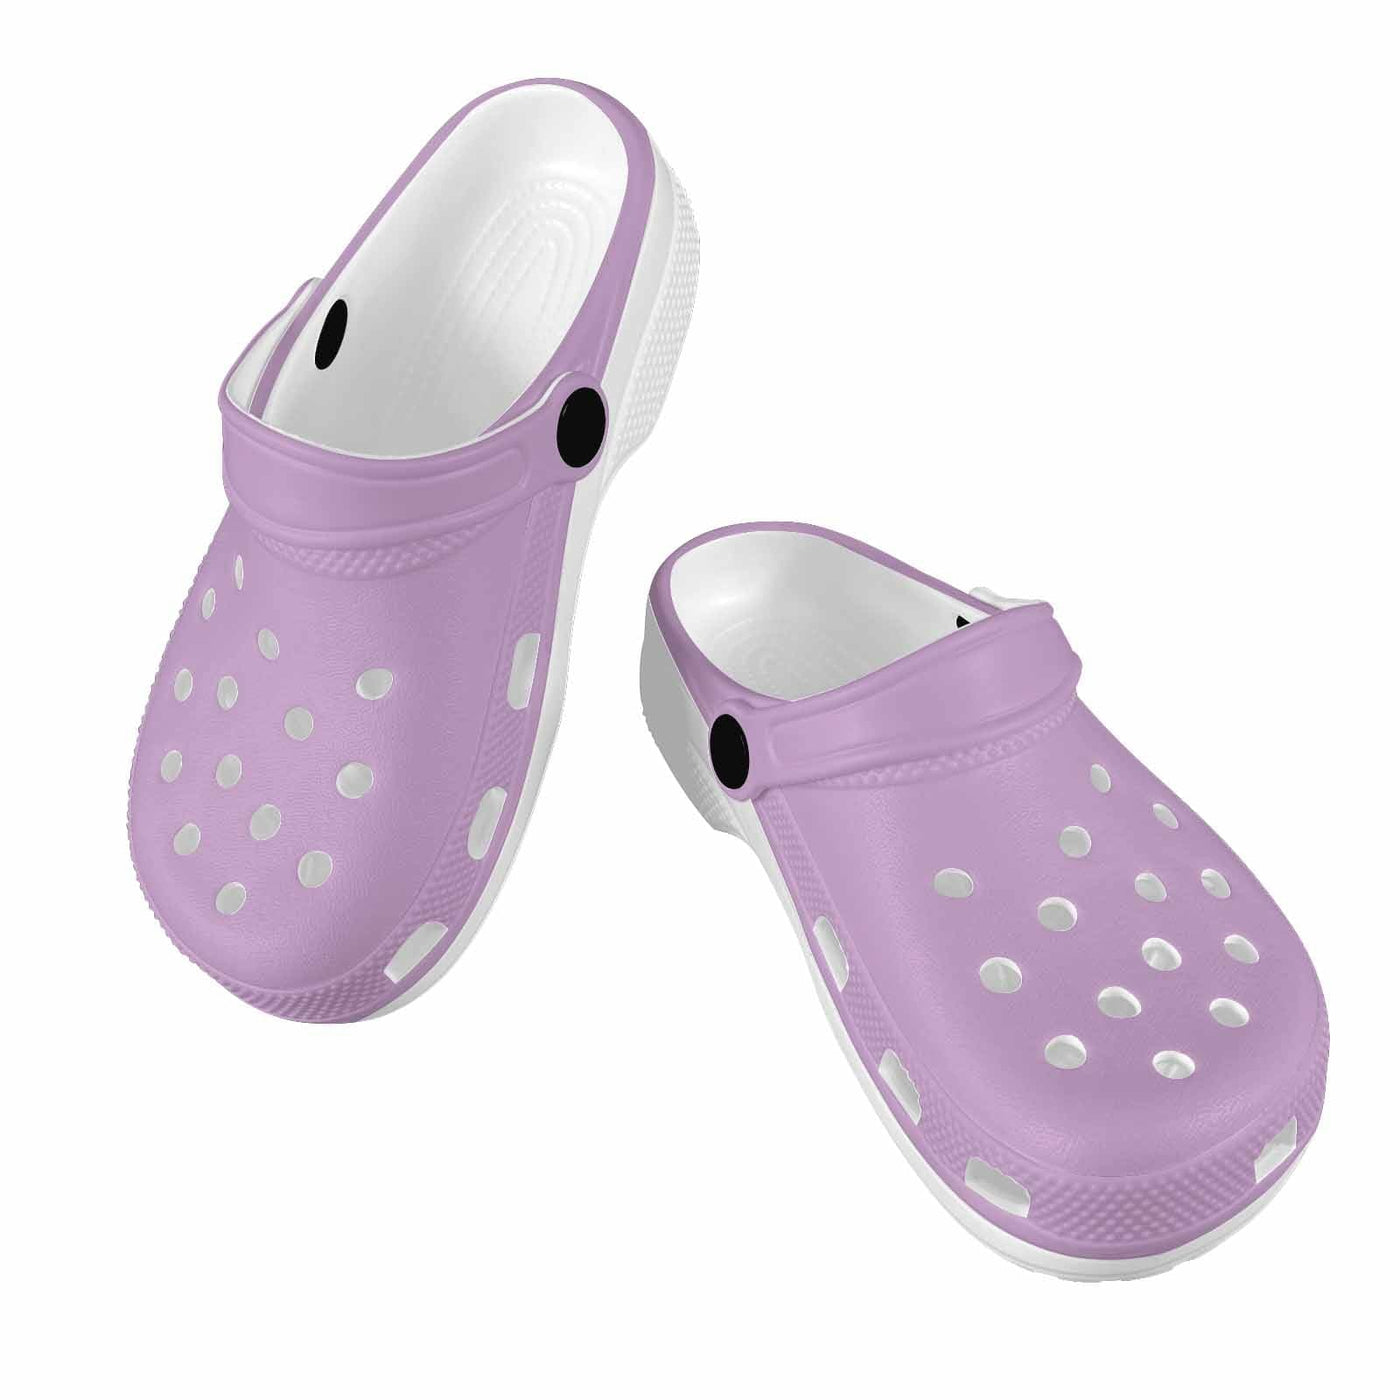 Lilac Purple Clogs For Youth - Unisex | Clogs | Youth